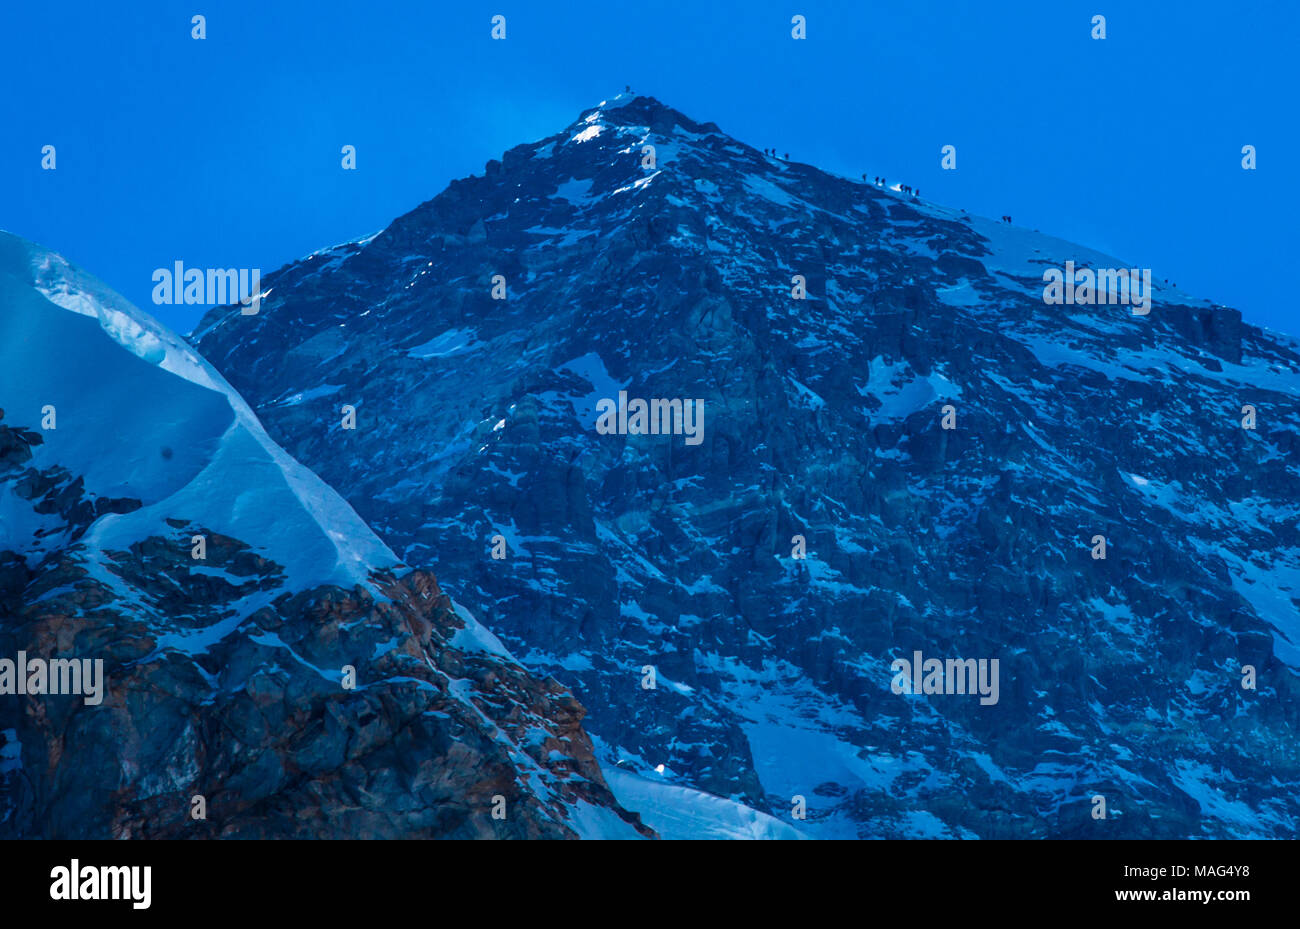 Snow can be seen blowing past the tiny backlit figures of climbers from both Nepal and Tibet reach the summit of Mount Everest, Nepal. Stock Photo